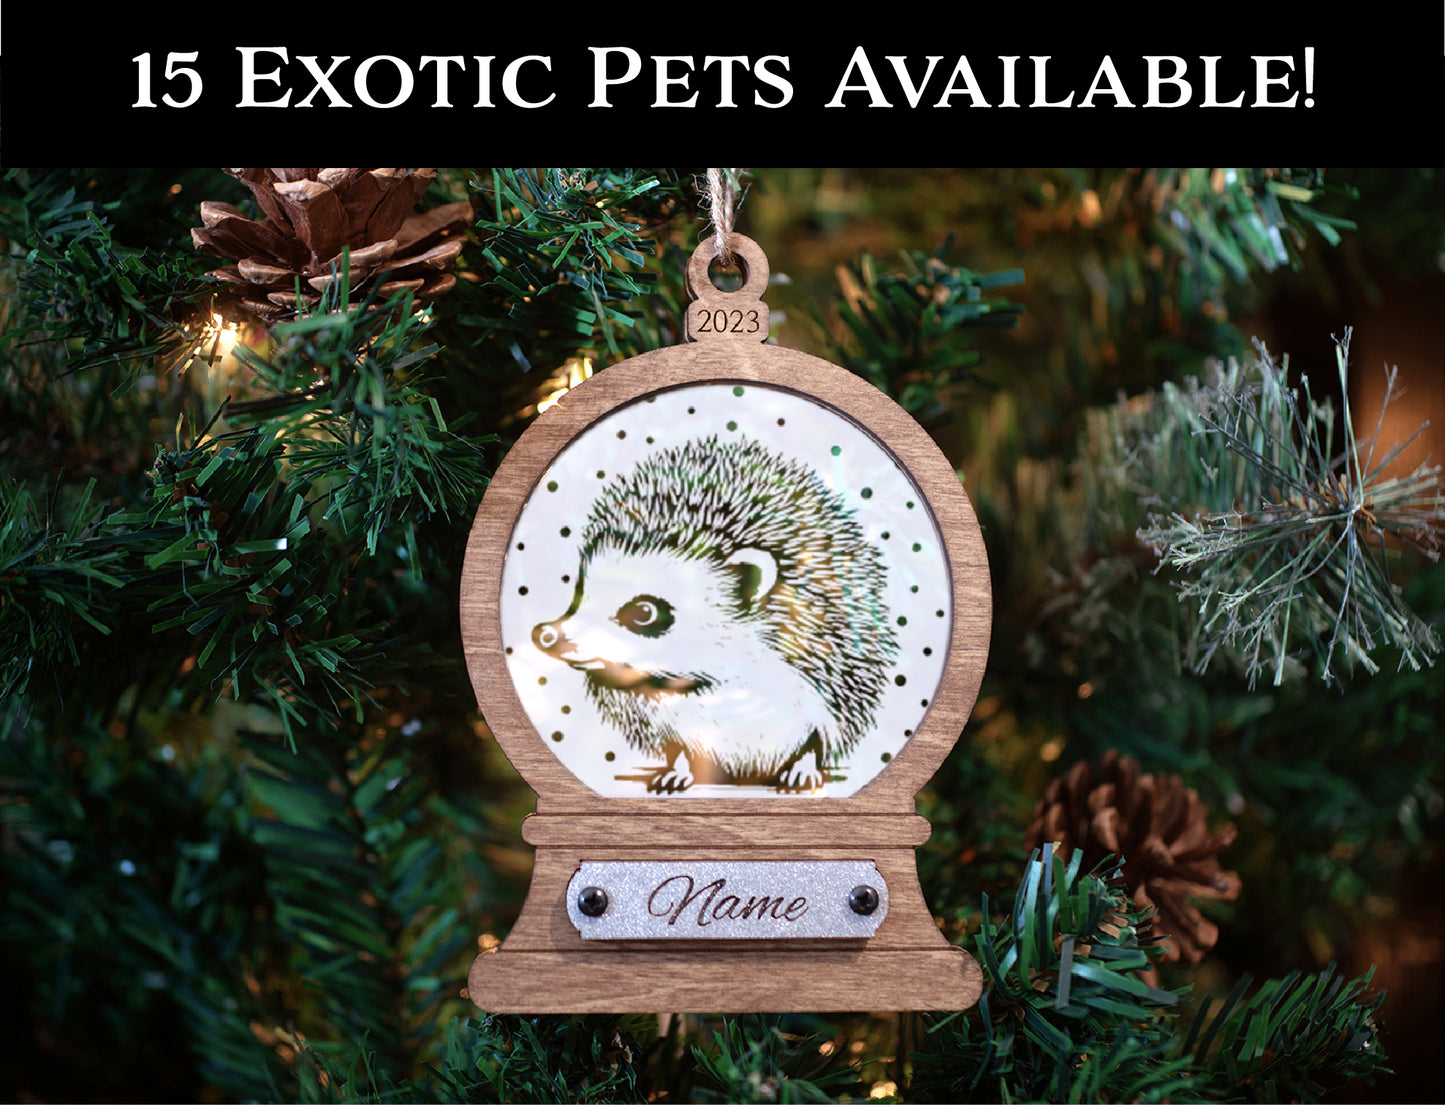 Personalized Acrylic and Wood Exotic Pet Snowglobe Ornaments